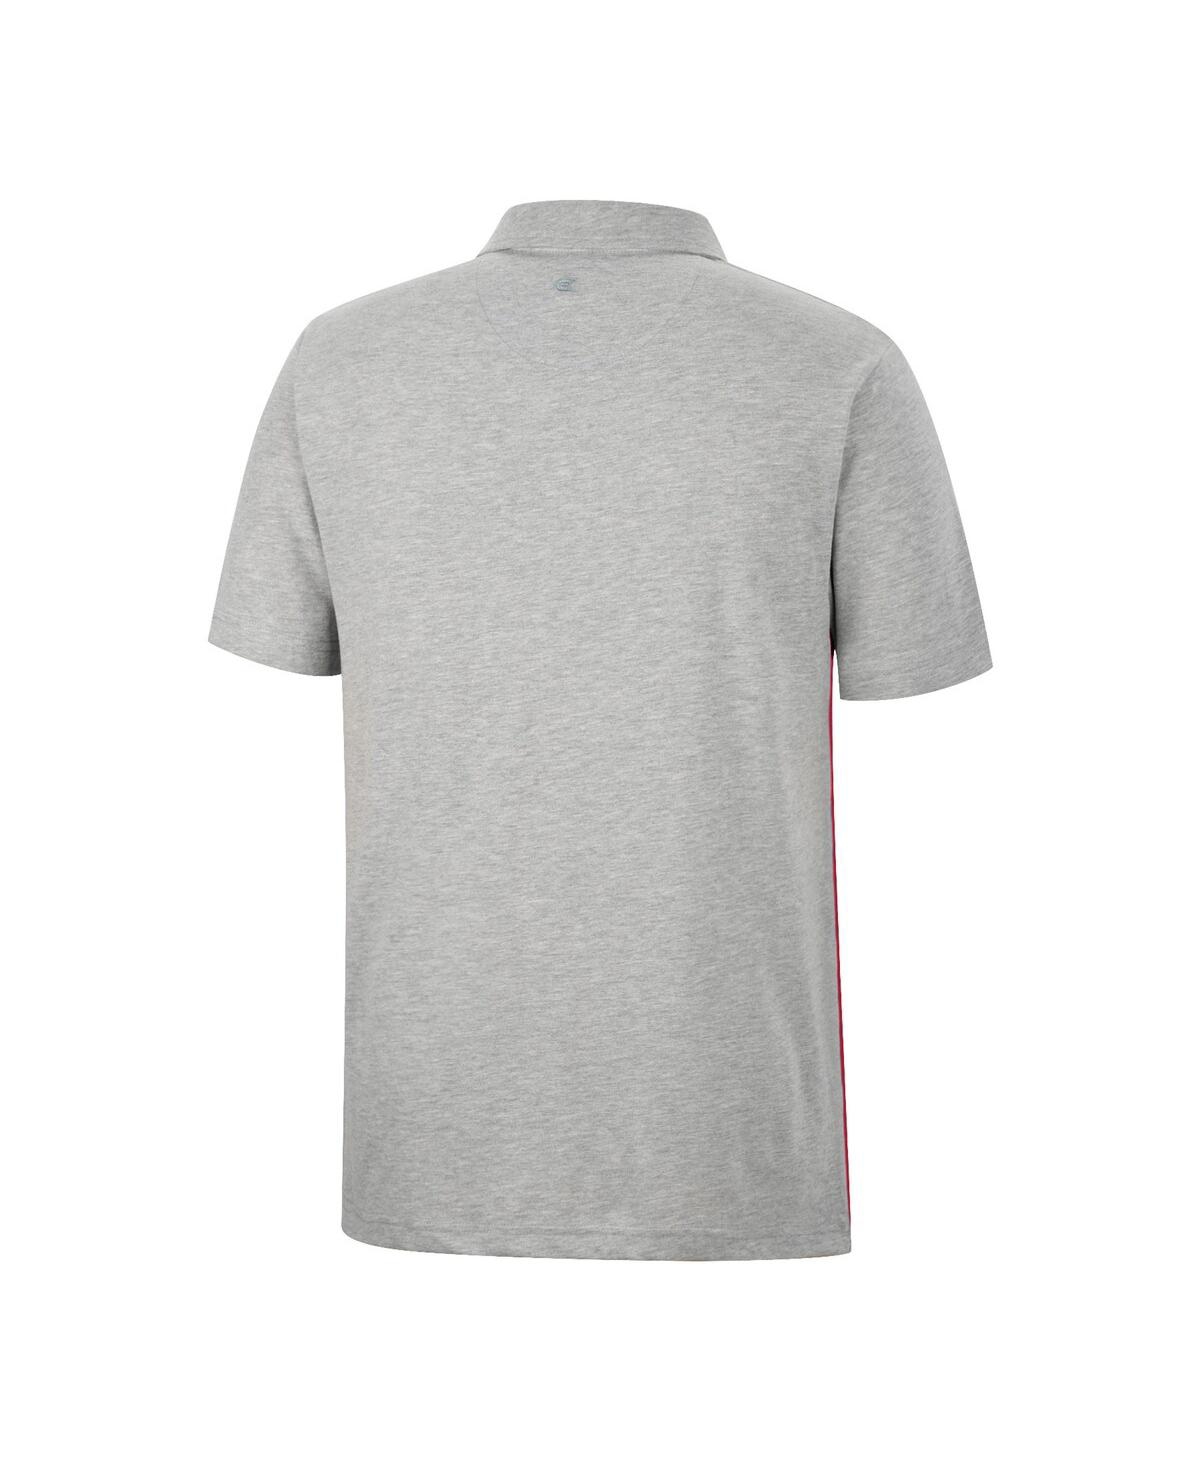 Shop Colosseum Men's  Cardinal, Heathered Gray Stanford Cardinal Caddie Polo Shirt In Cardinal,heathered Gray